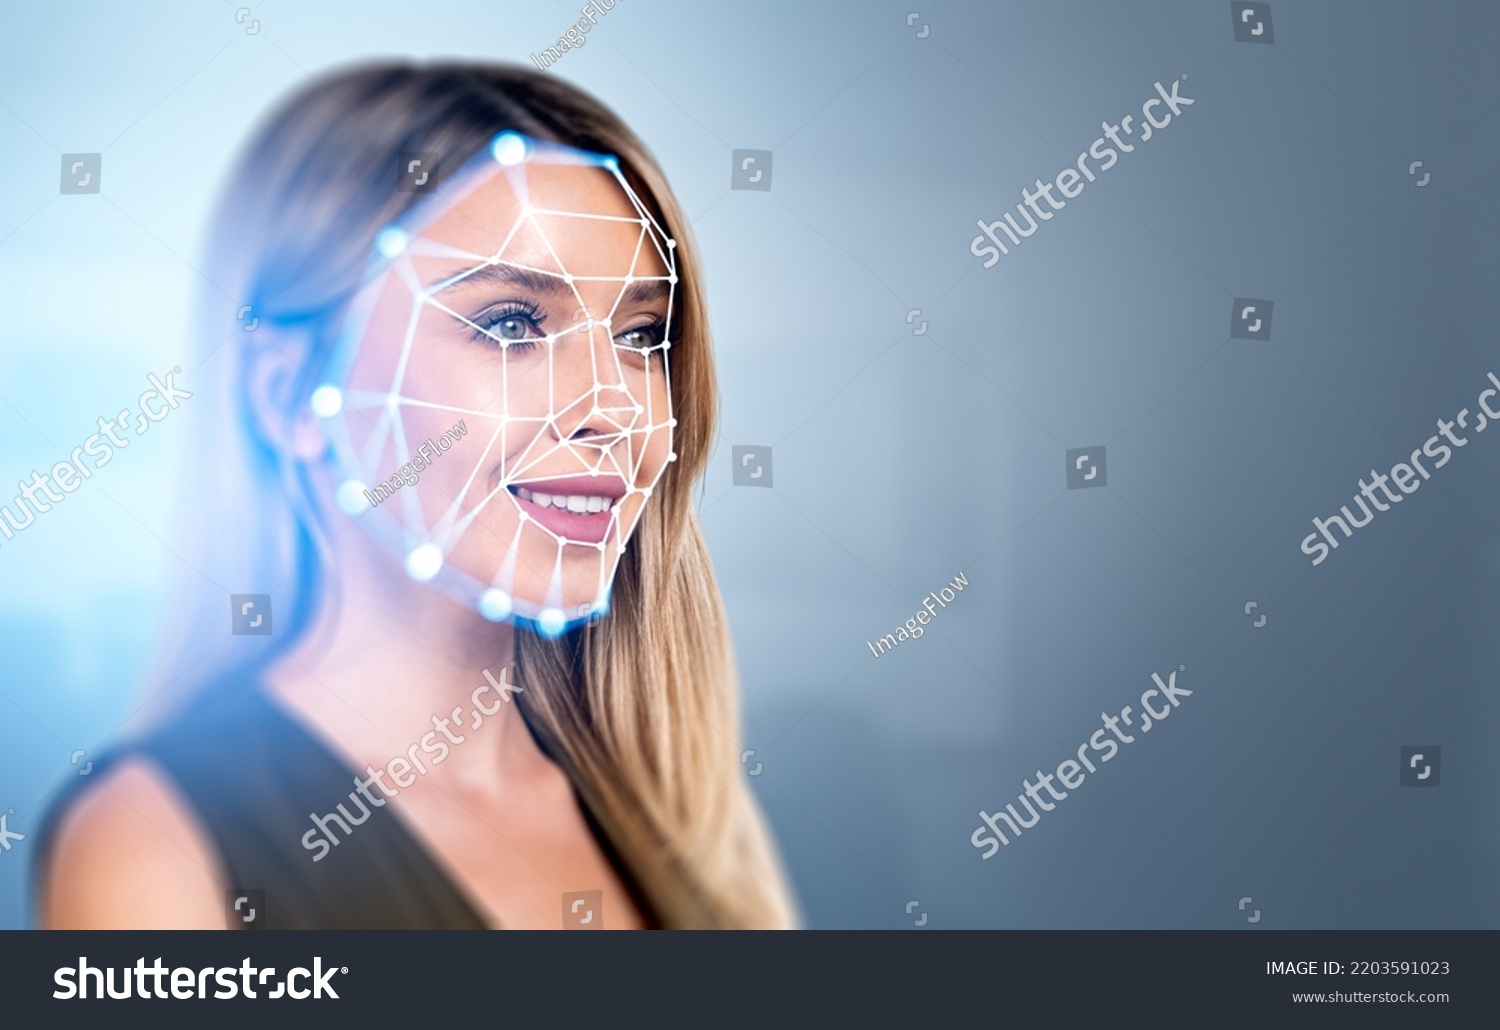 Smiling businesswoman portrait and digital biometric scanning hologram, face detection and recognition. Concept of face id and artificial intelligence. Copy space #2203591023